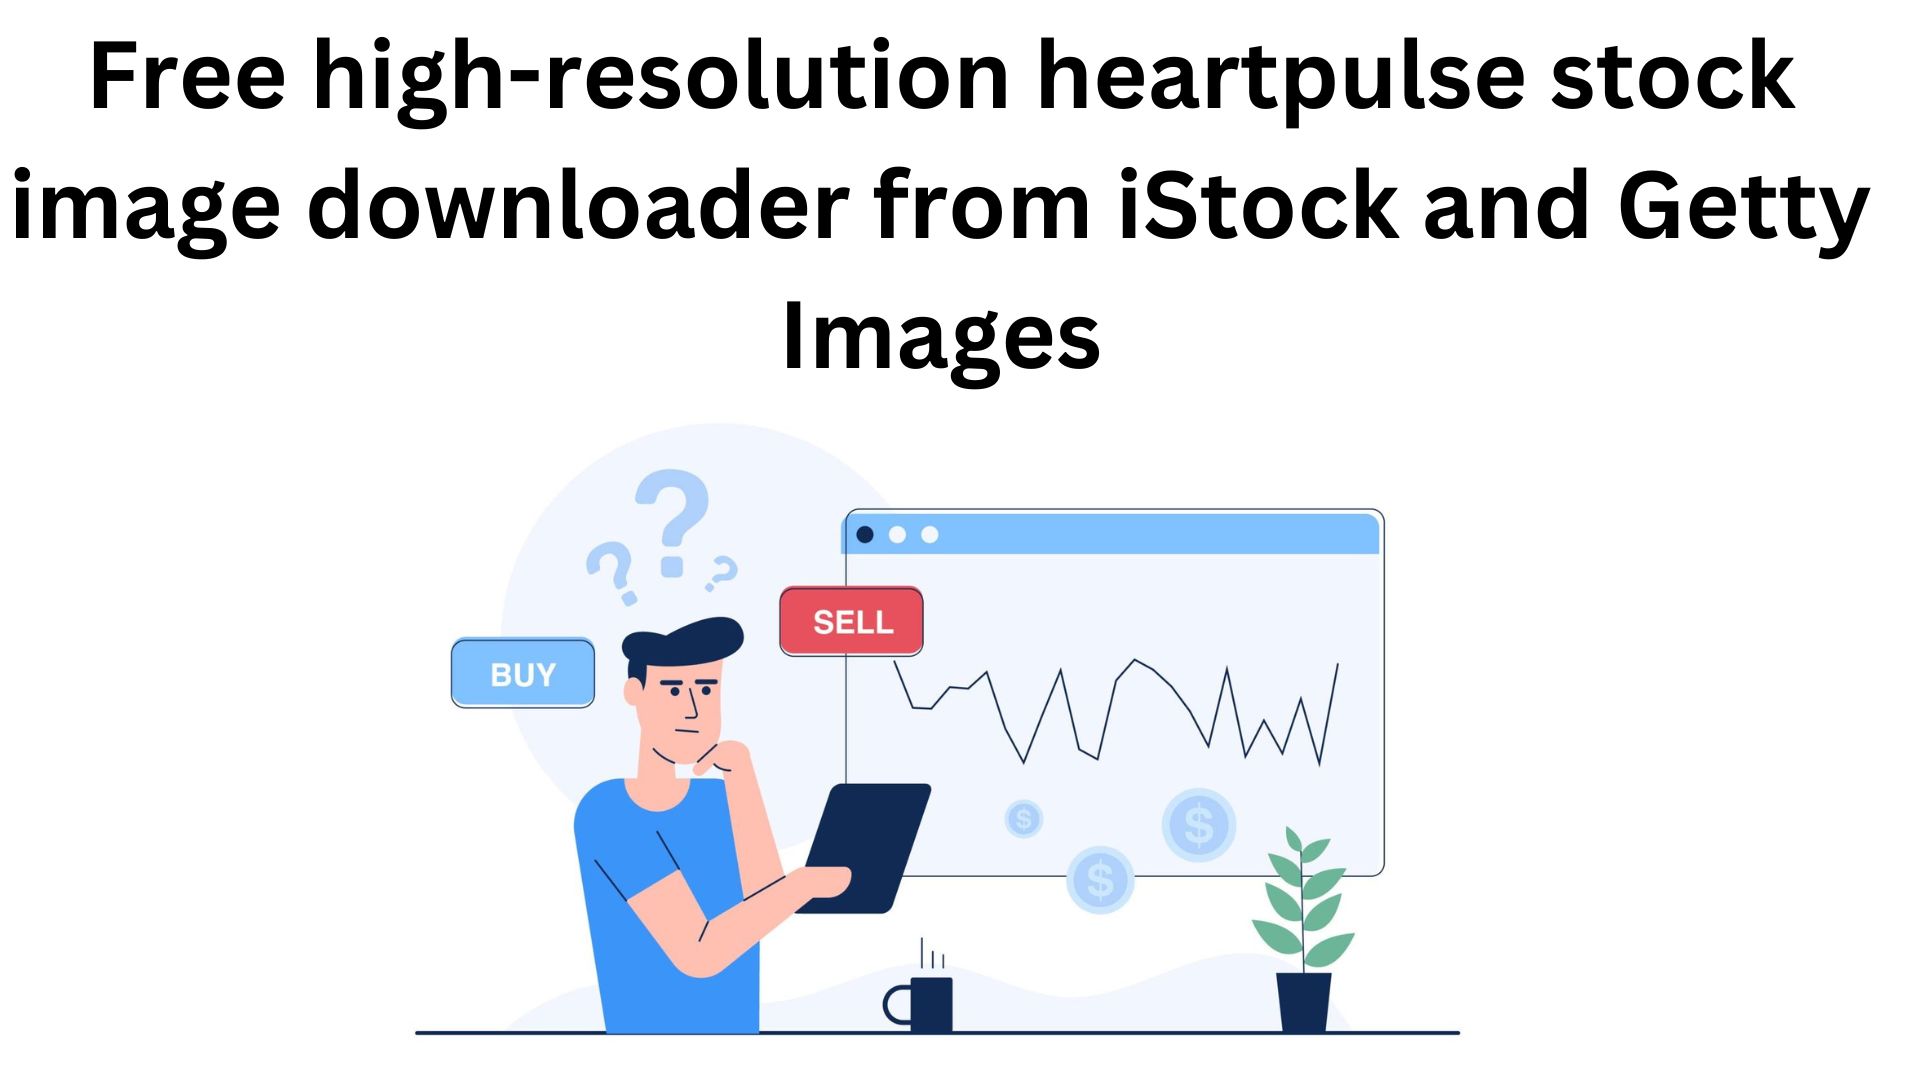 Free high-resolution heartpulse stock image downloader from istock and getty images